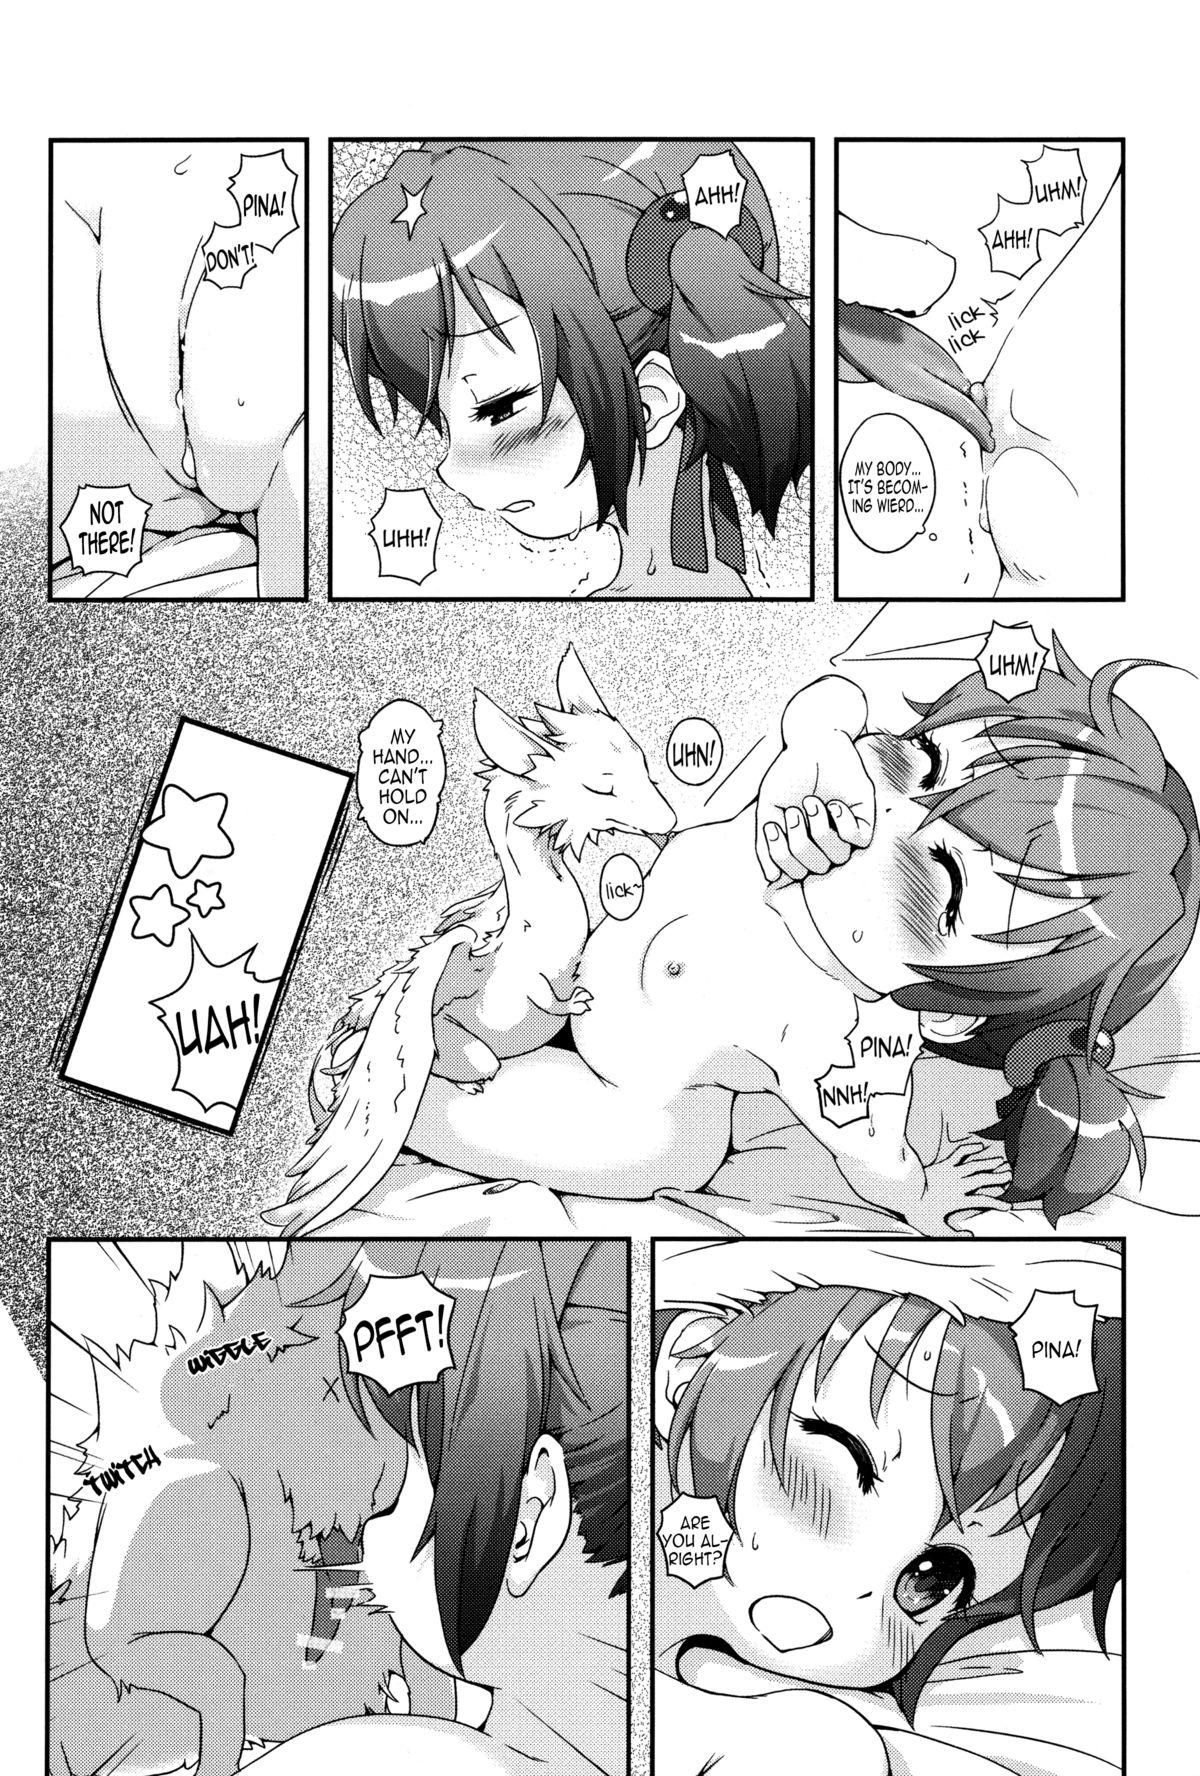 Behind A Beast Tamer's Special Event - Sword art online Oral Sex - Page 8